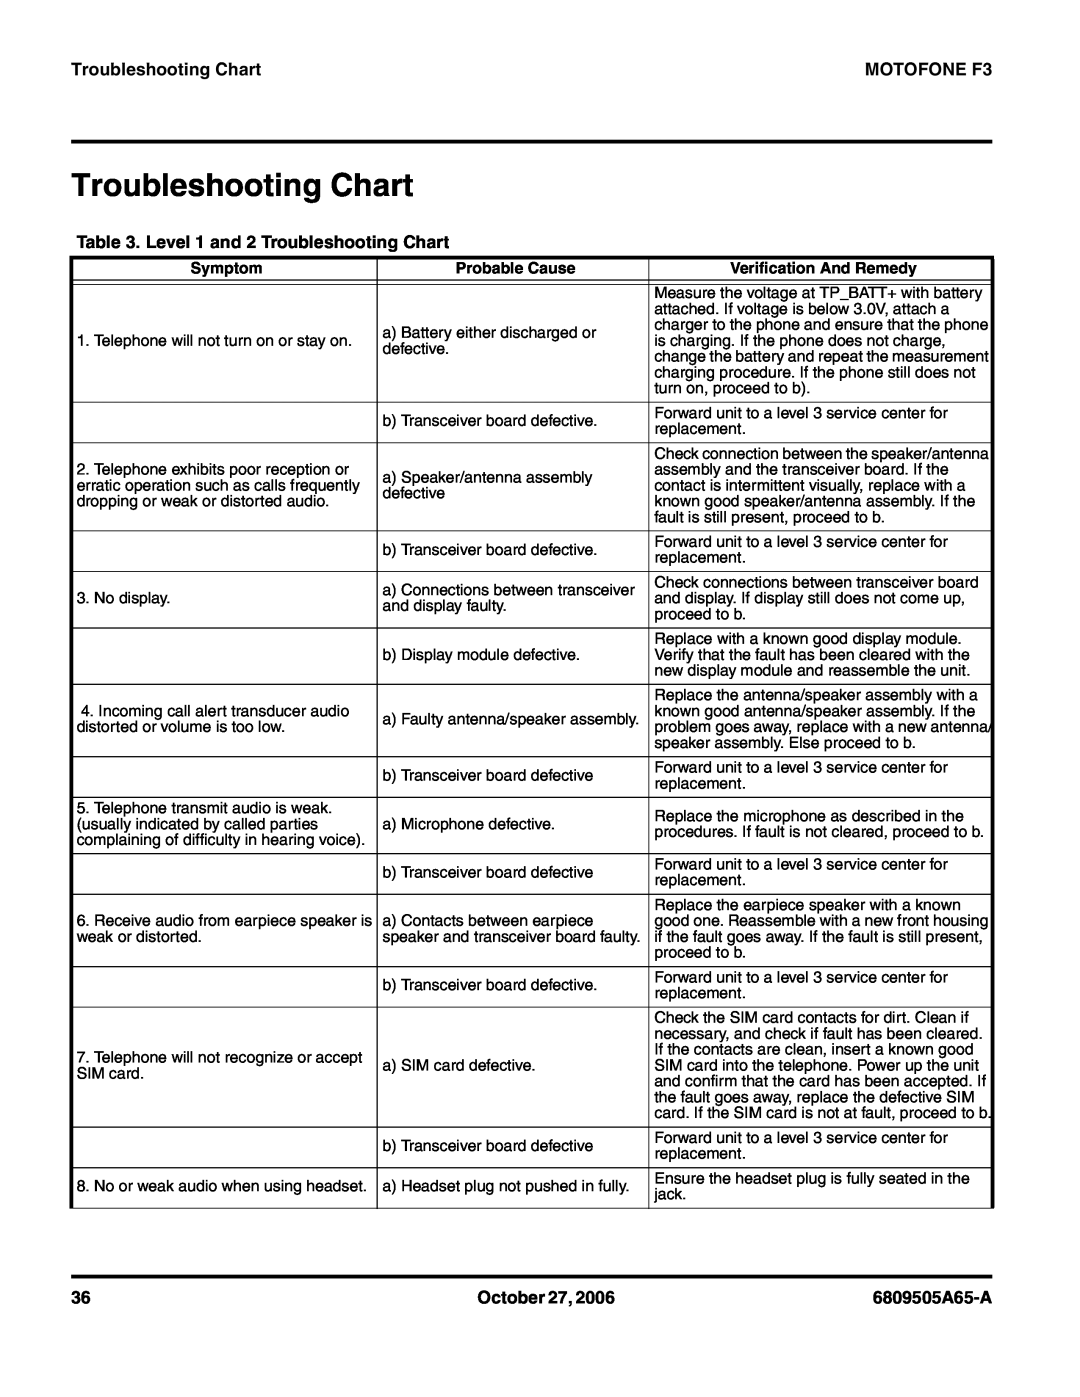 Motorola service manual Level 1 and 2 Troubleshooting Chart, MOTOFONE F3, October 27, 6809505A65-A 